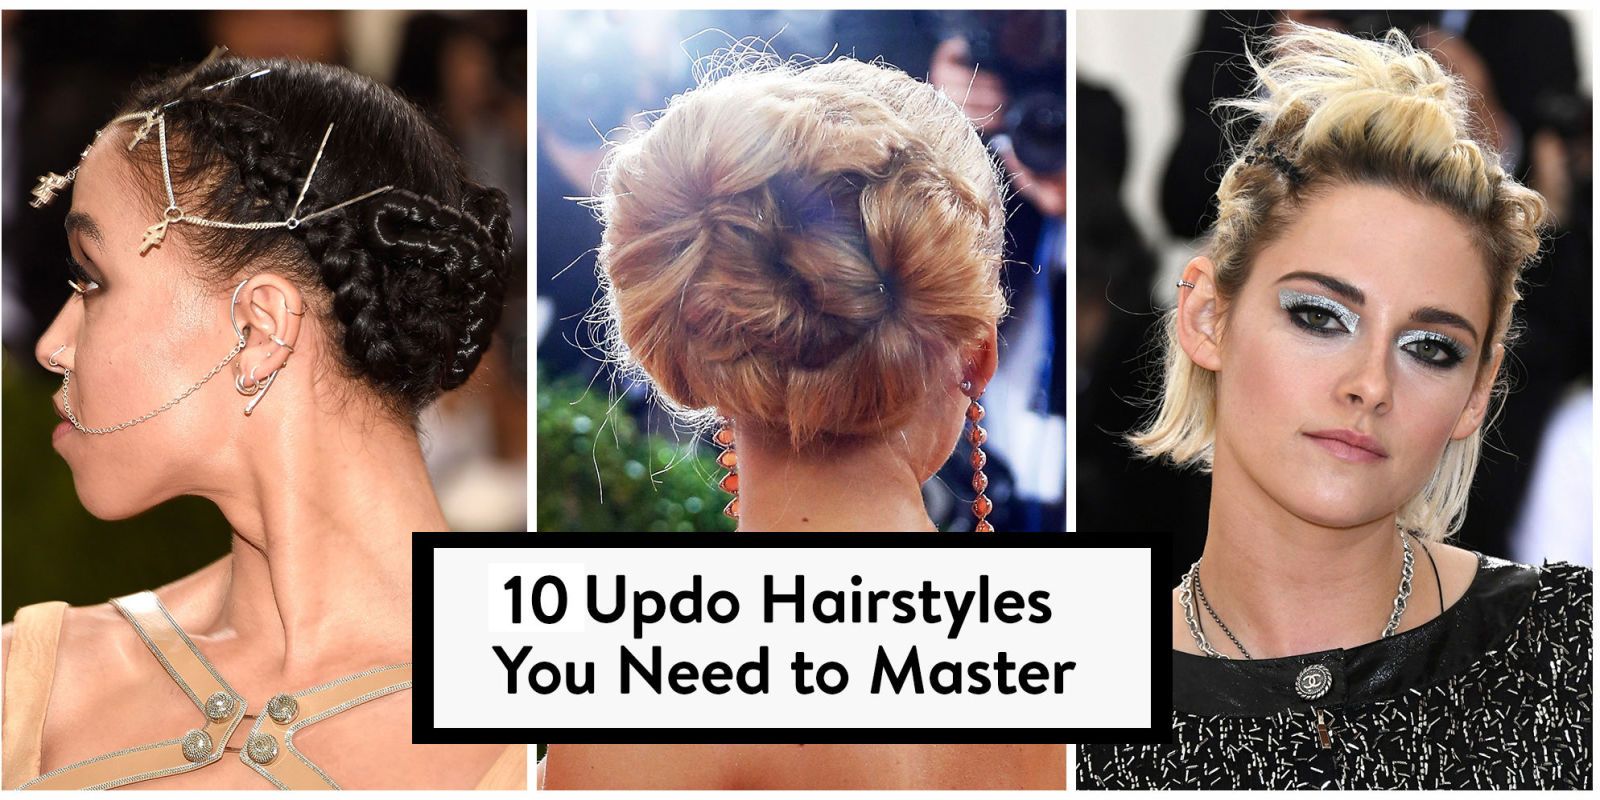 6 Updo Hairstyles That Are Great For Thick Hair